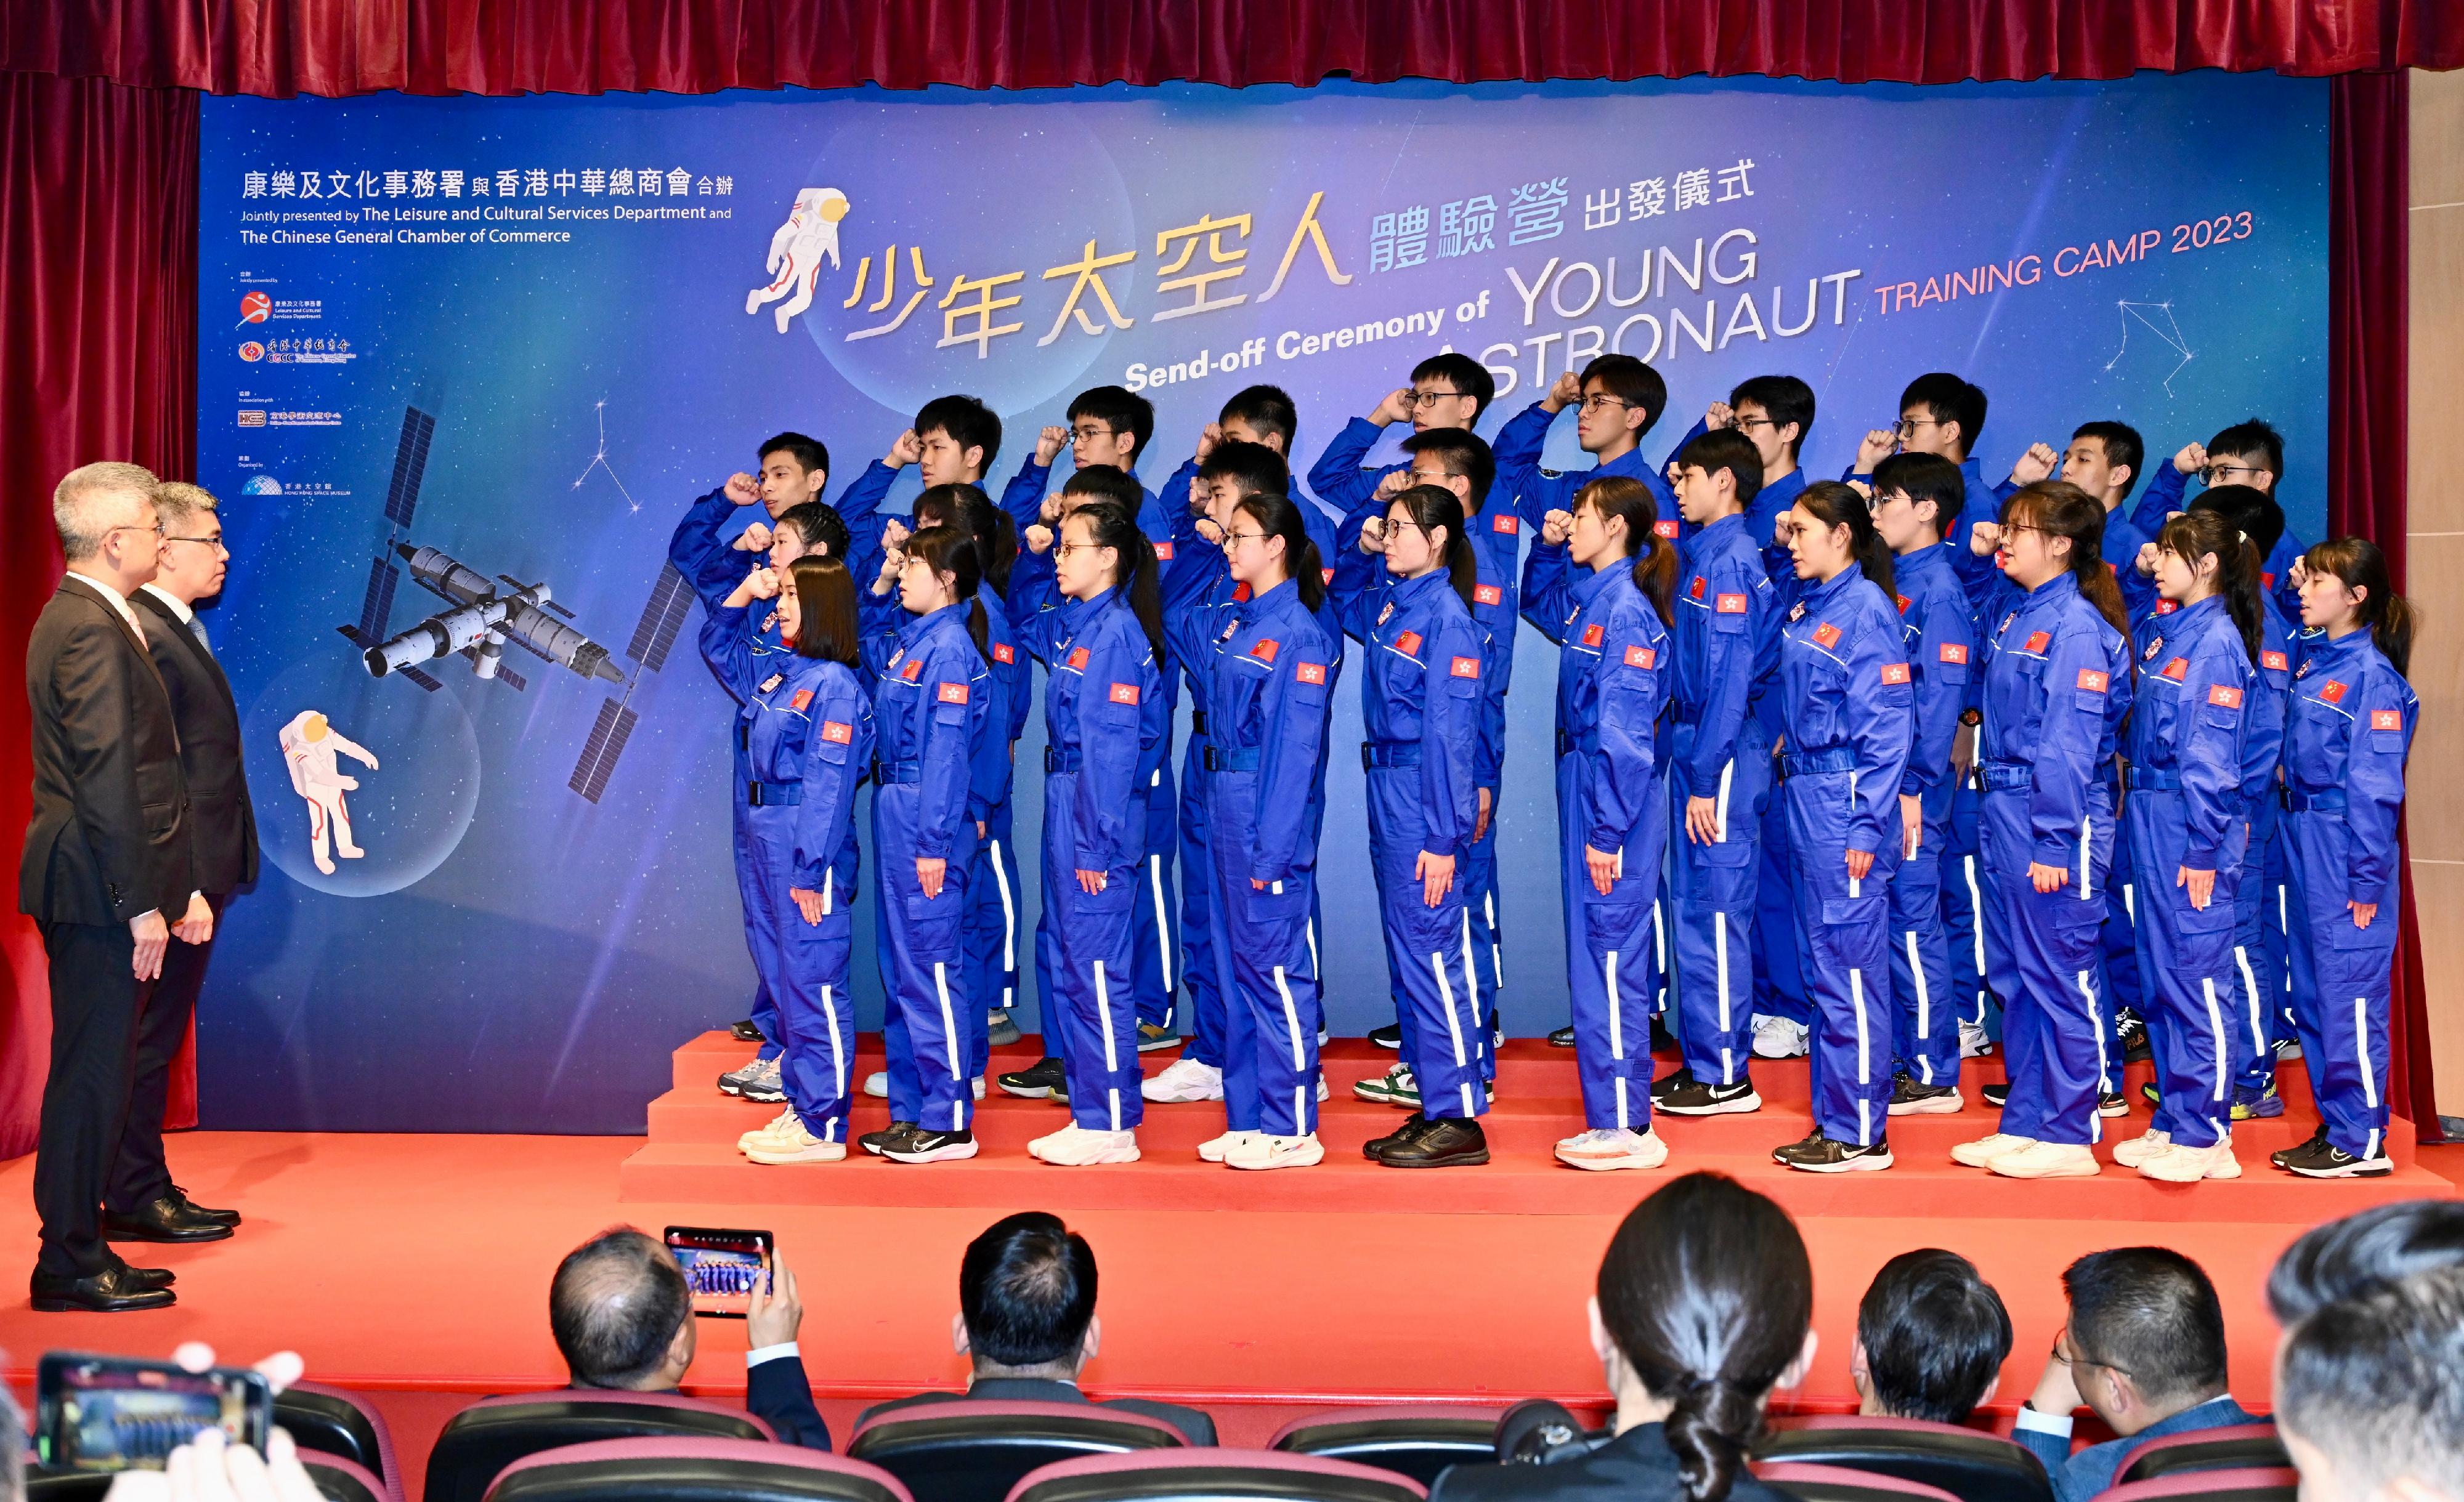 A send-off ceremony for the Young Astronaut Training Camp 2023 was held at the Hong Kong Space Museum today (July 25). Photo shows the Acting Secretary for Culture, Sports and Tourism, Mr Raistlin Lau (first left), and the President of the Beijing-Hong Kong Academic Exchange Centre, Mr Hsu Hoi-shan (second left), witnessing the oath-taking by the 30 Young Astronauts. The Young Astronauts will set off for Beijing on July 29.